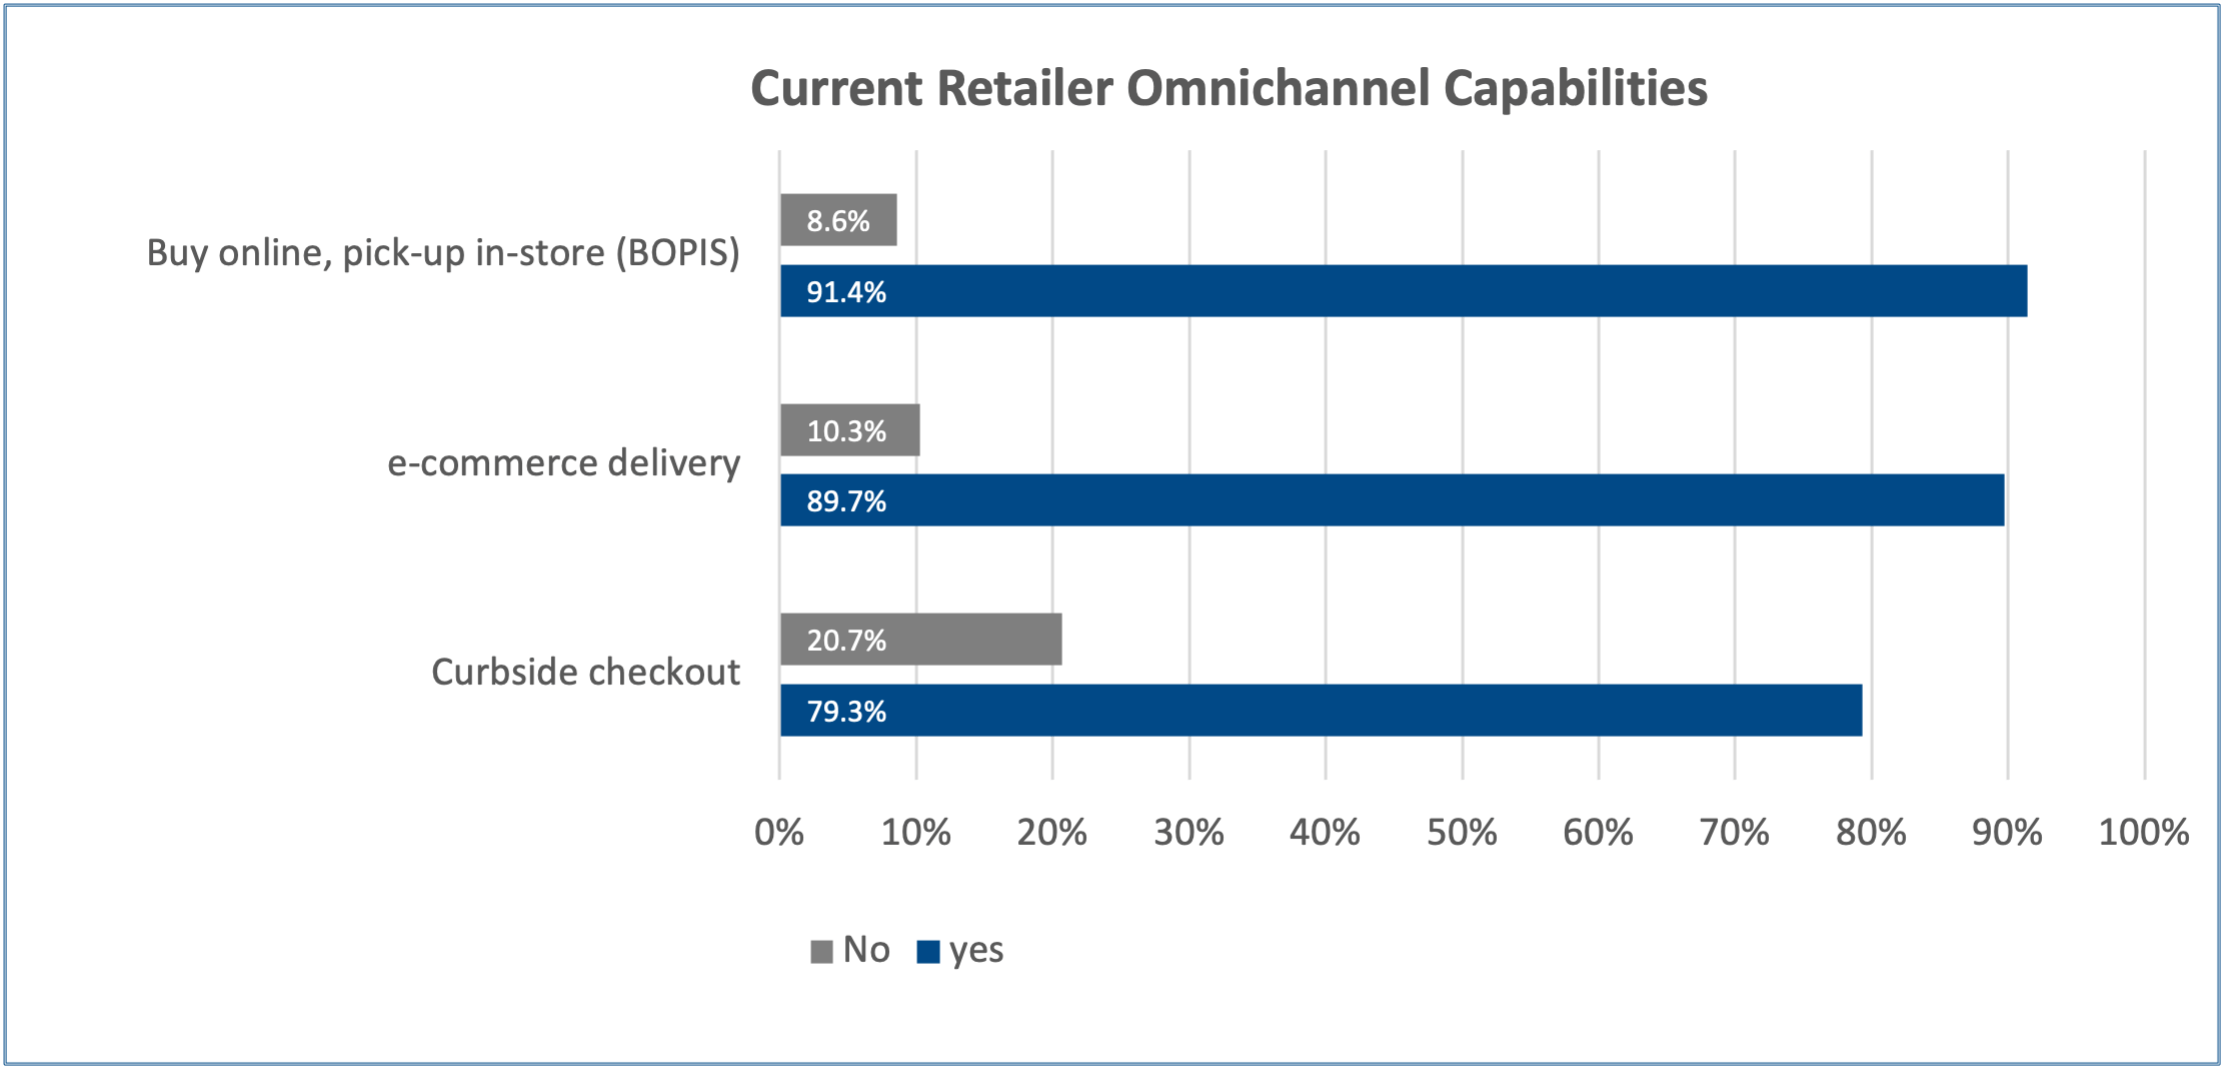 A graph showing the current retailer omnichannel capabilities